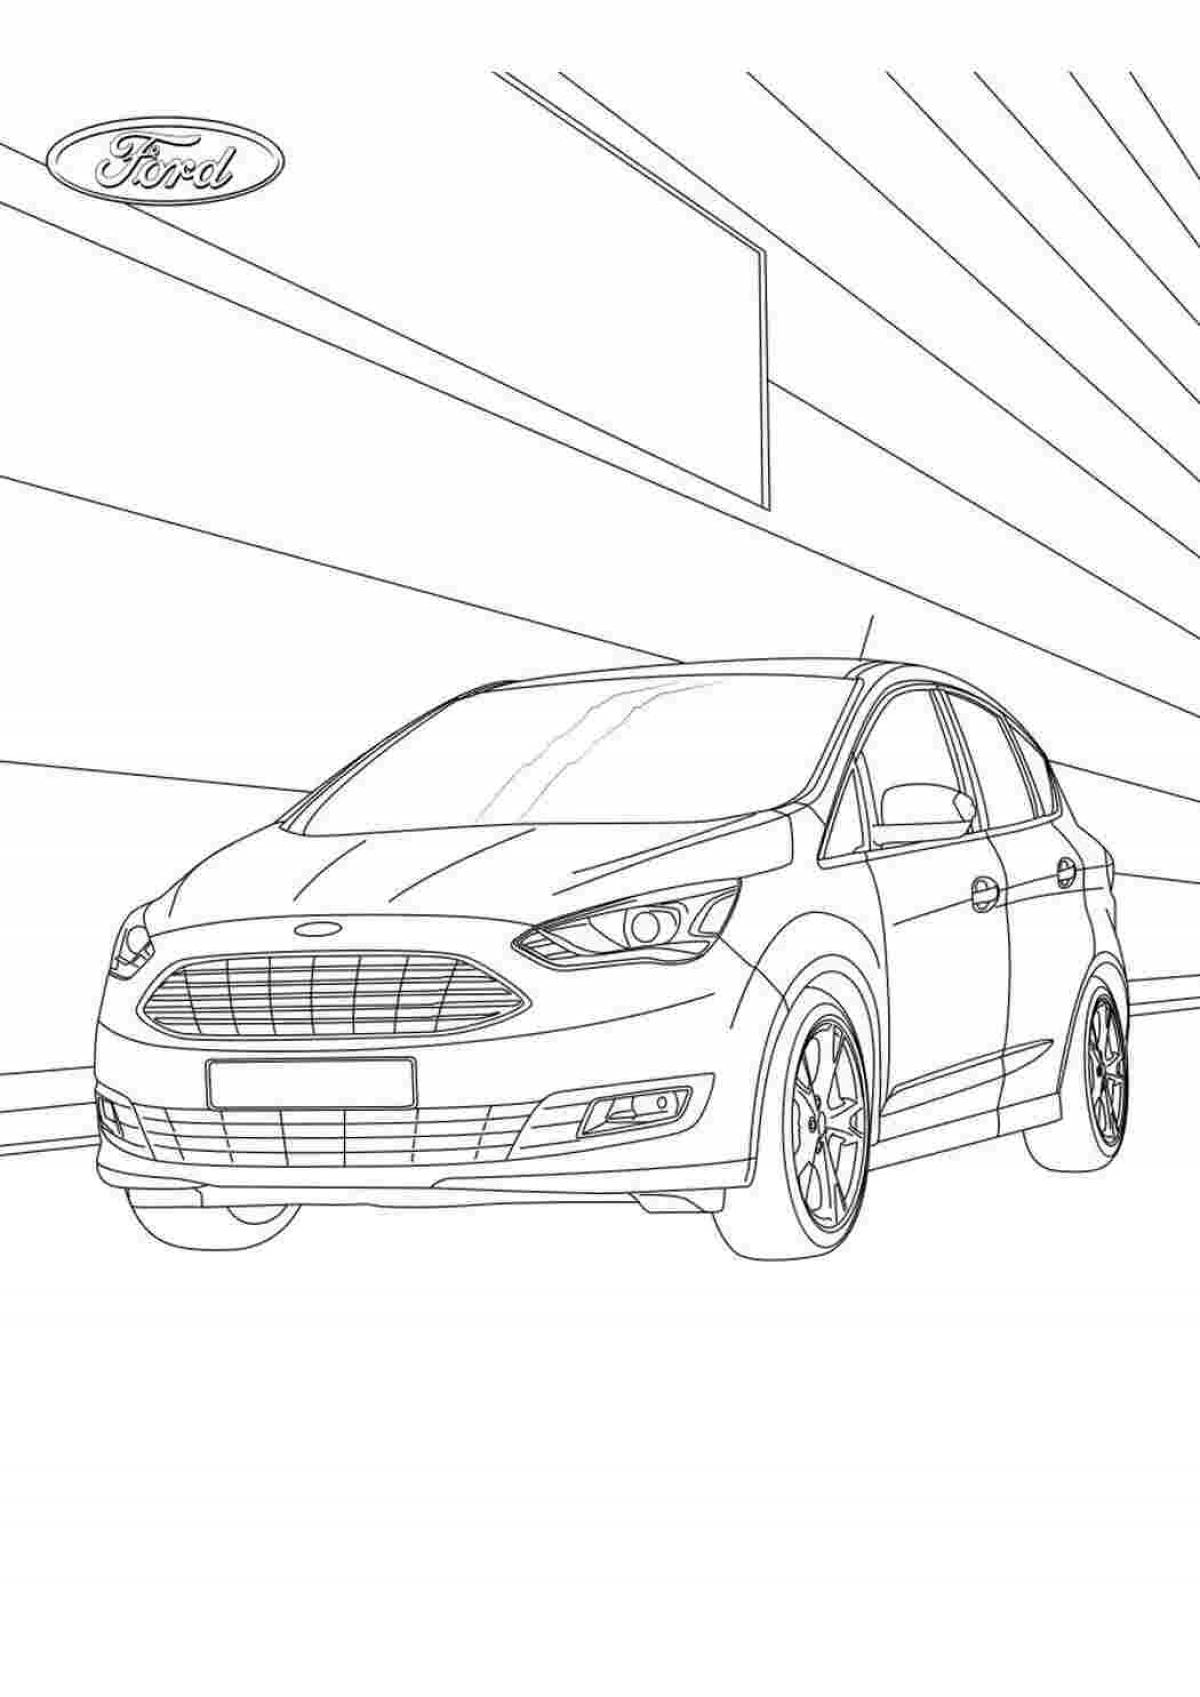 Exquisite ford mondeo coloring book